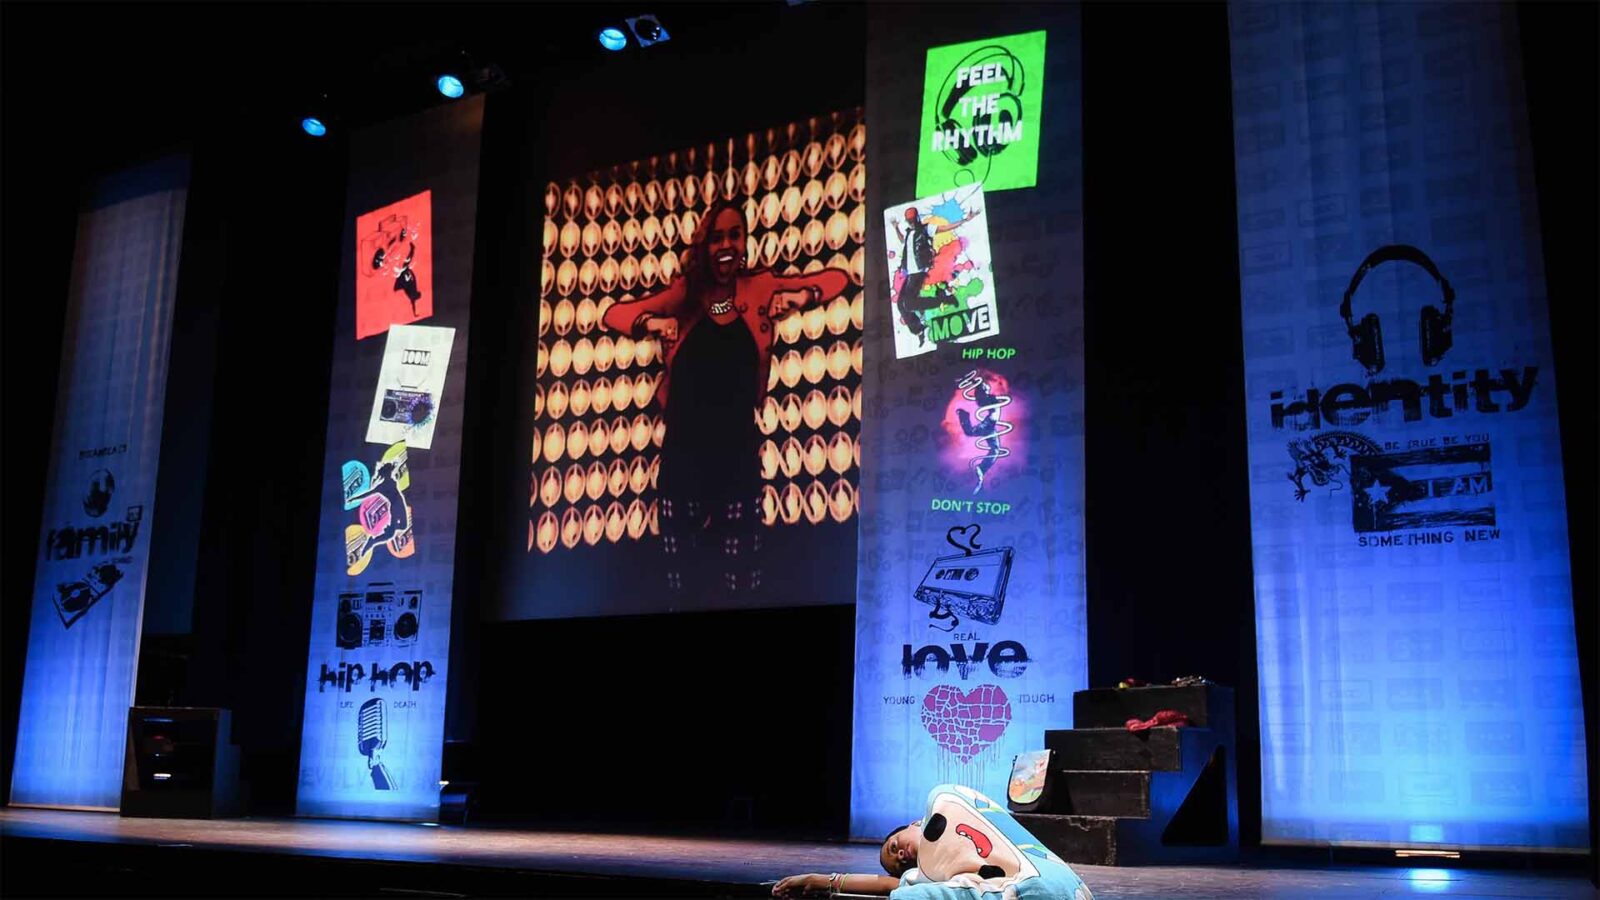 A whole stage filled with images of Cuba and dancers projected on a screen. On the stage, a woman lays on the floor with a blanket.